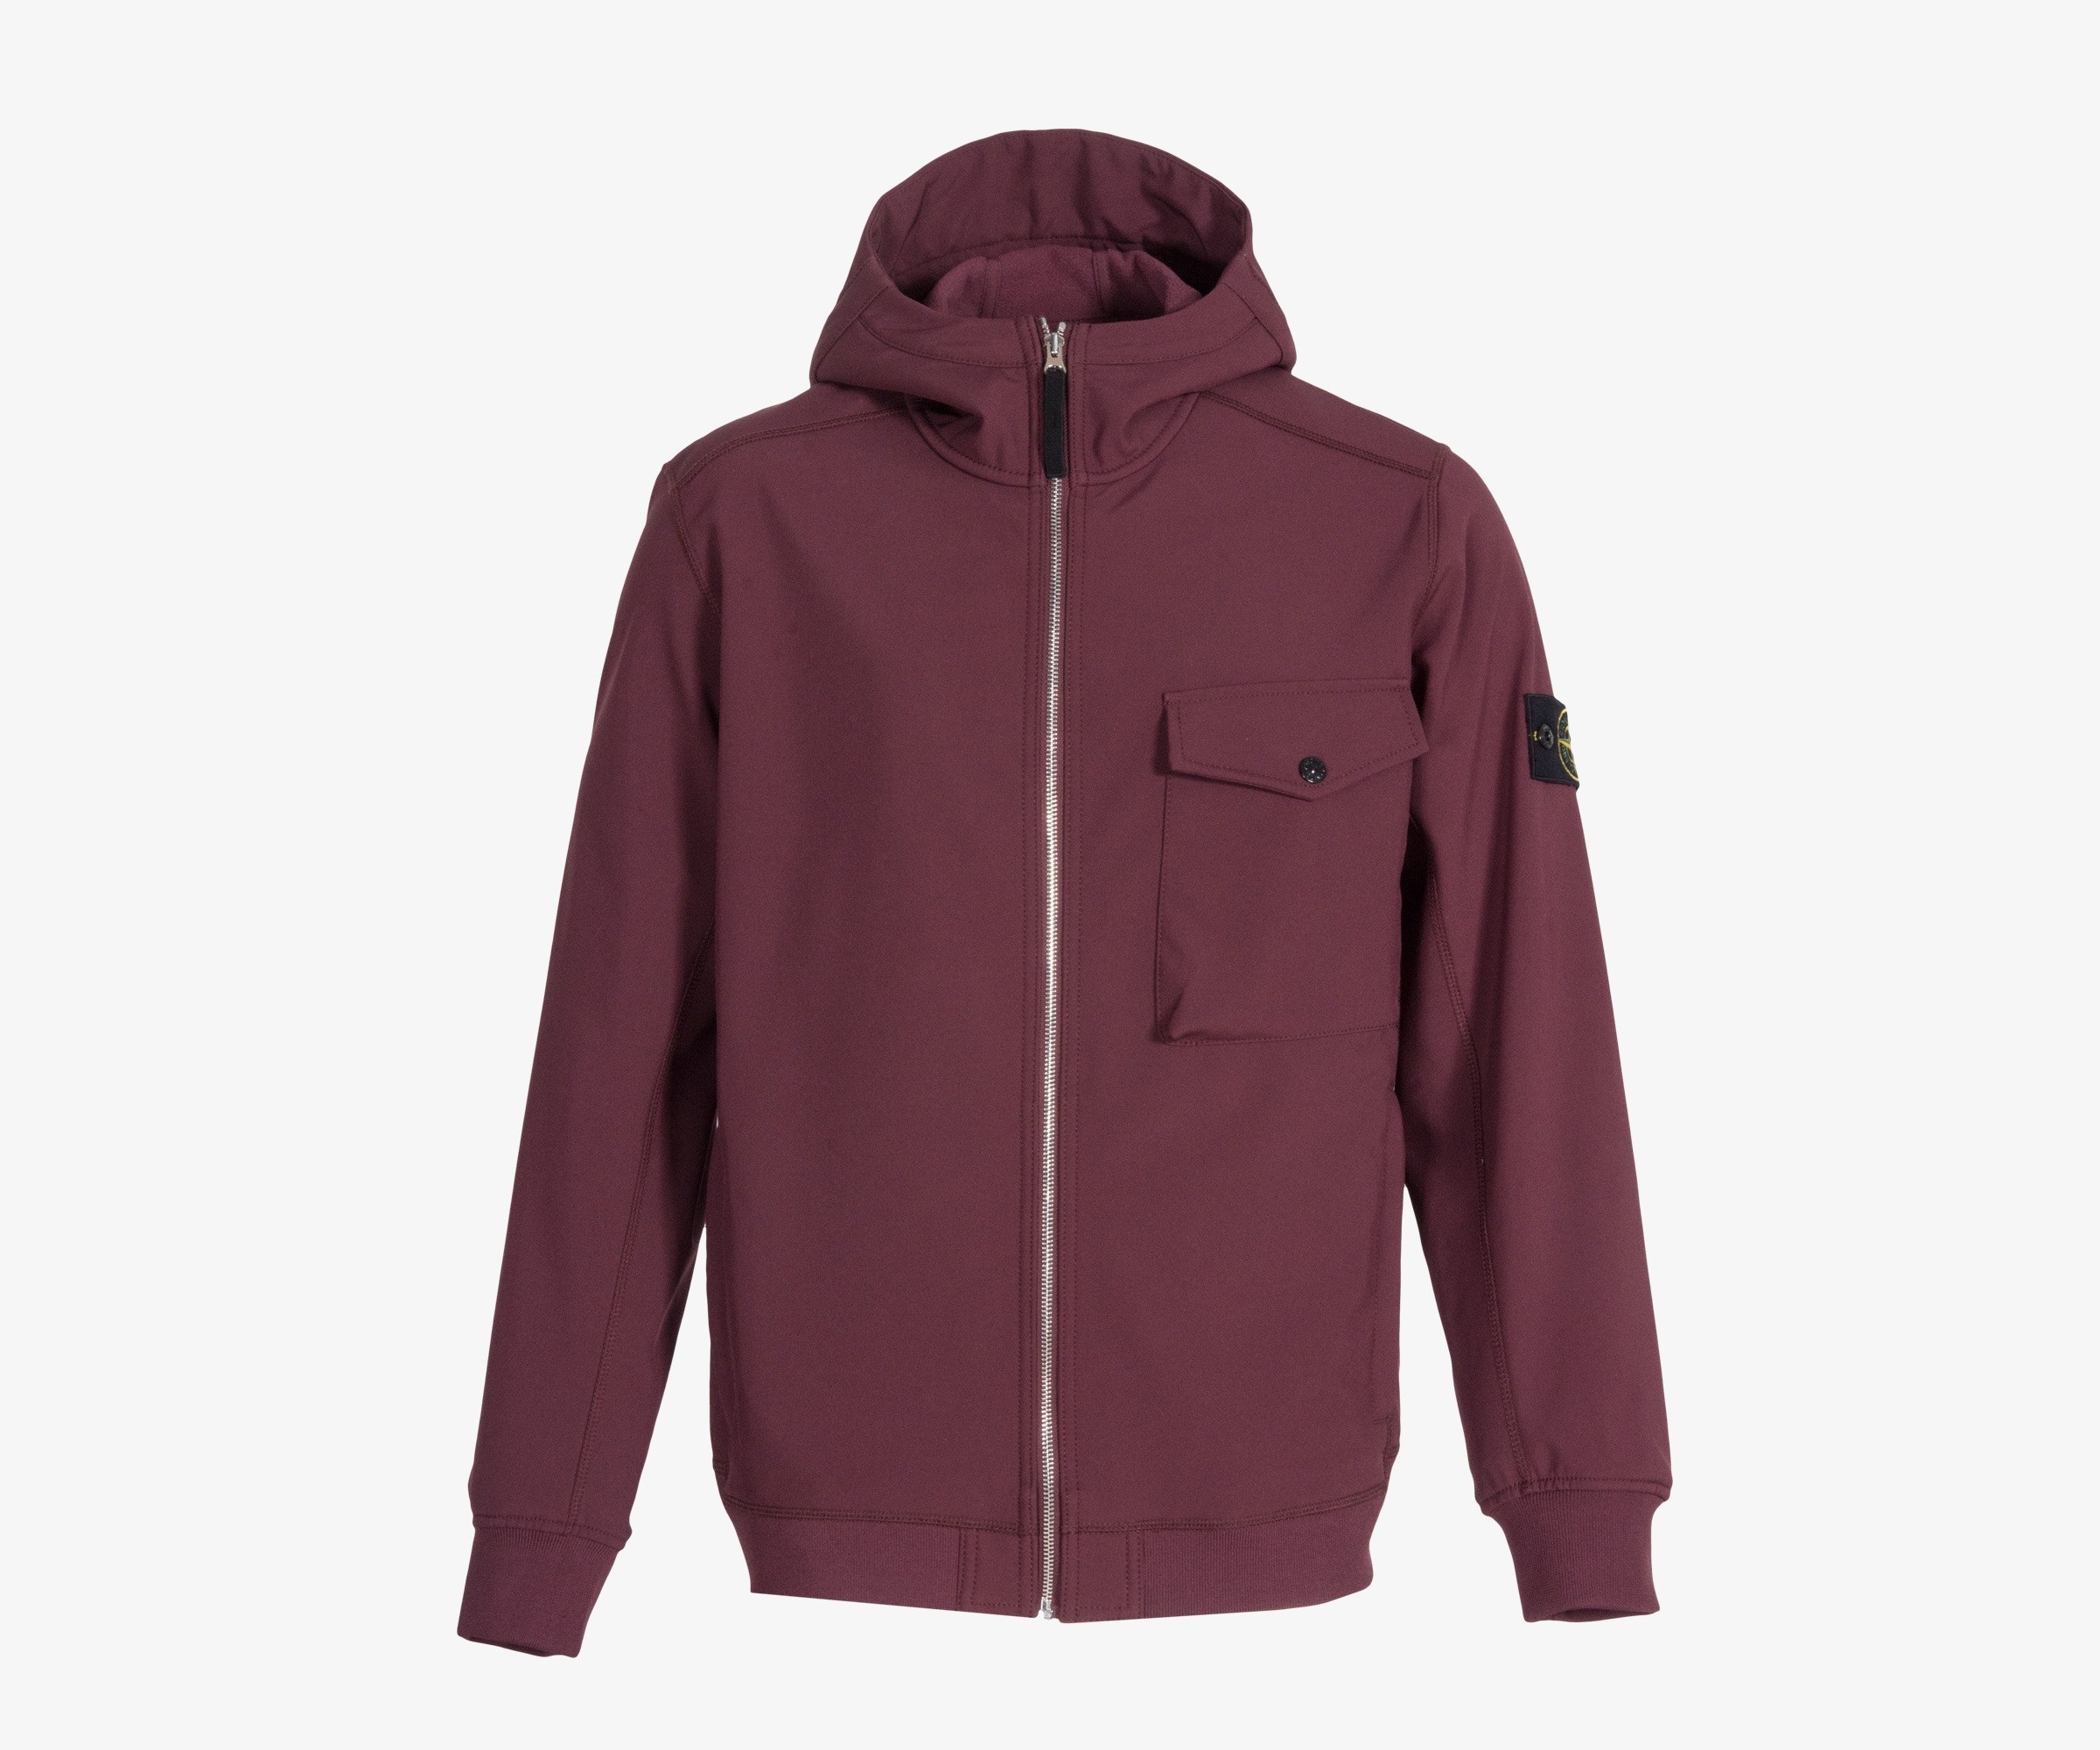 Stone Island 'Soft Shell-R' Hooded Jacket With Chest Pocket Burgundy